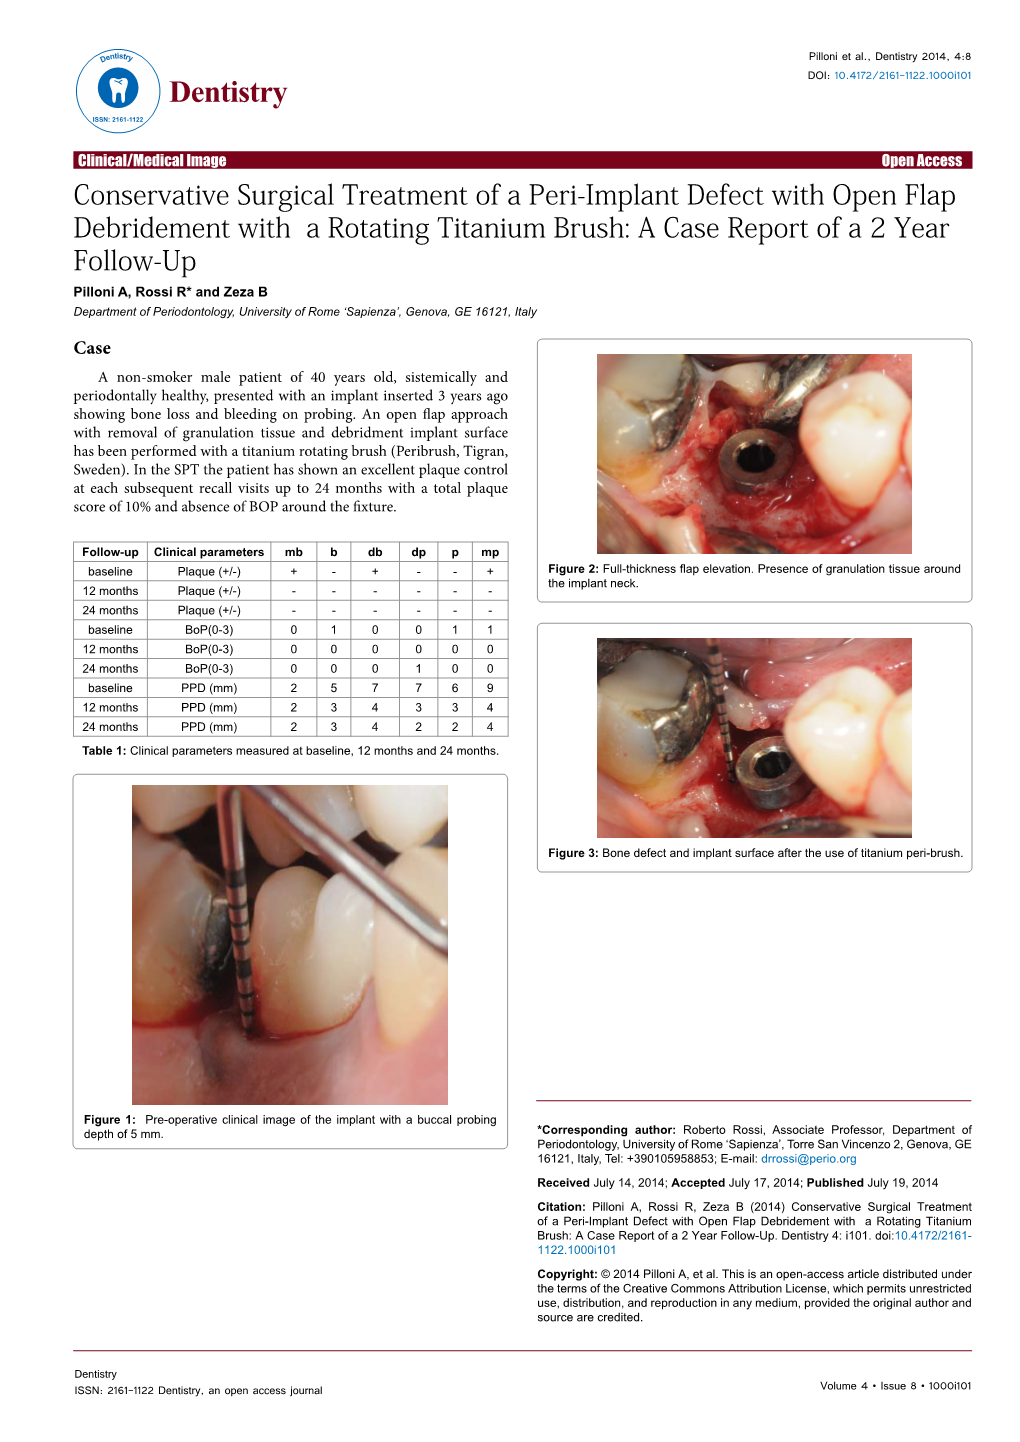 Conservative Surgical Treatment of a Peri-Implant Defect with Open Flap Debridement with a Rotating Titanium Brush: a Case Repor